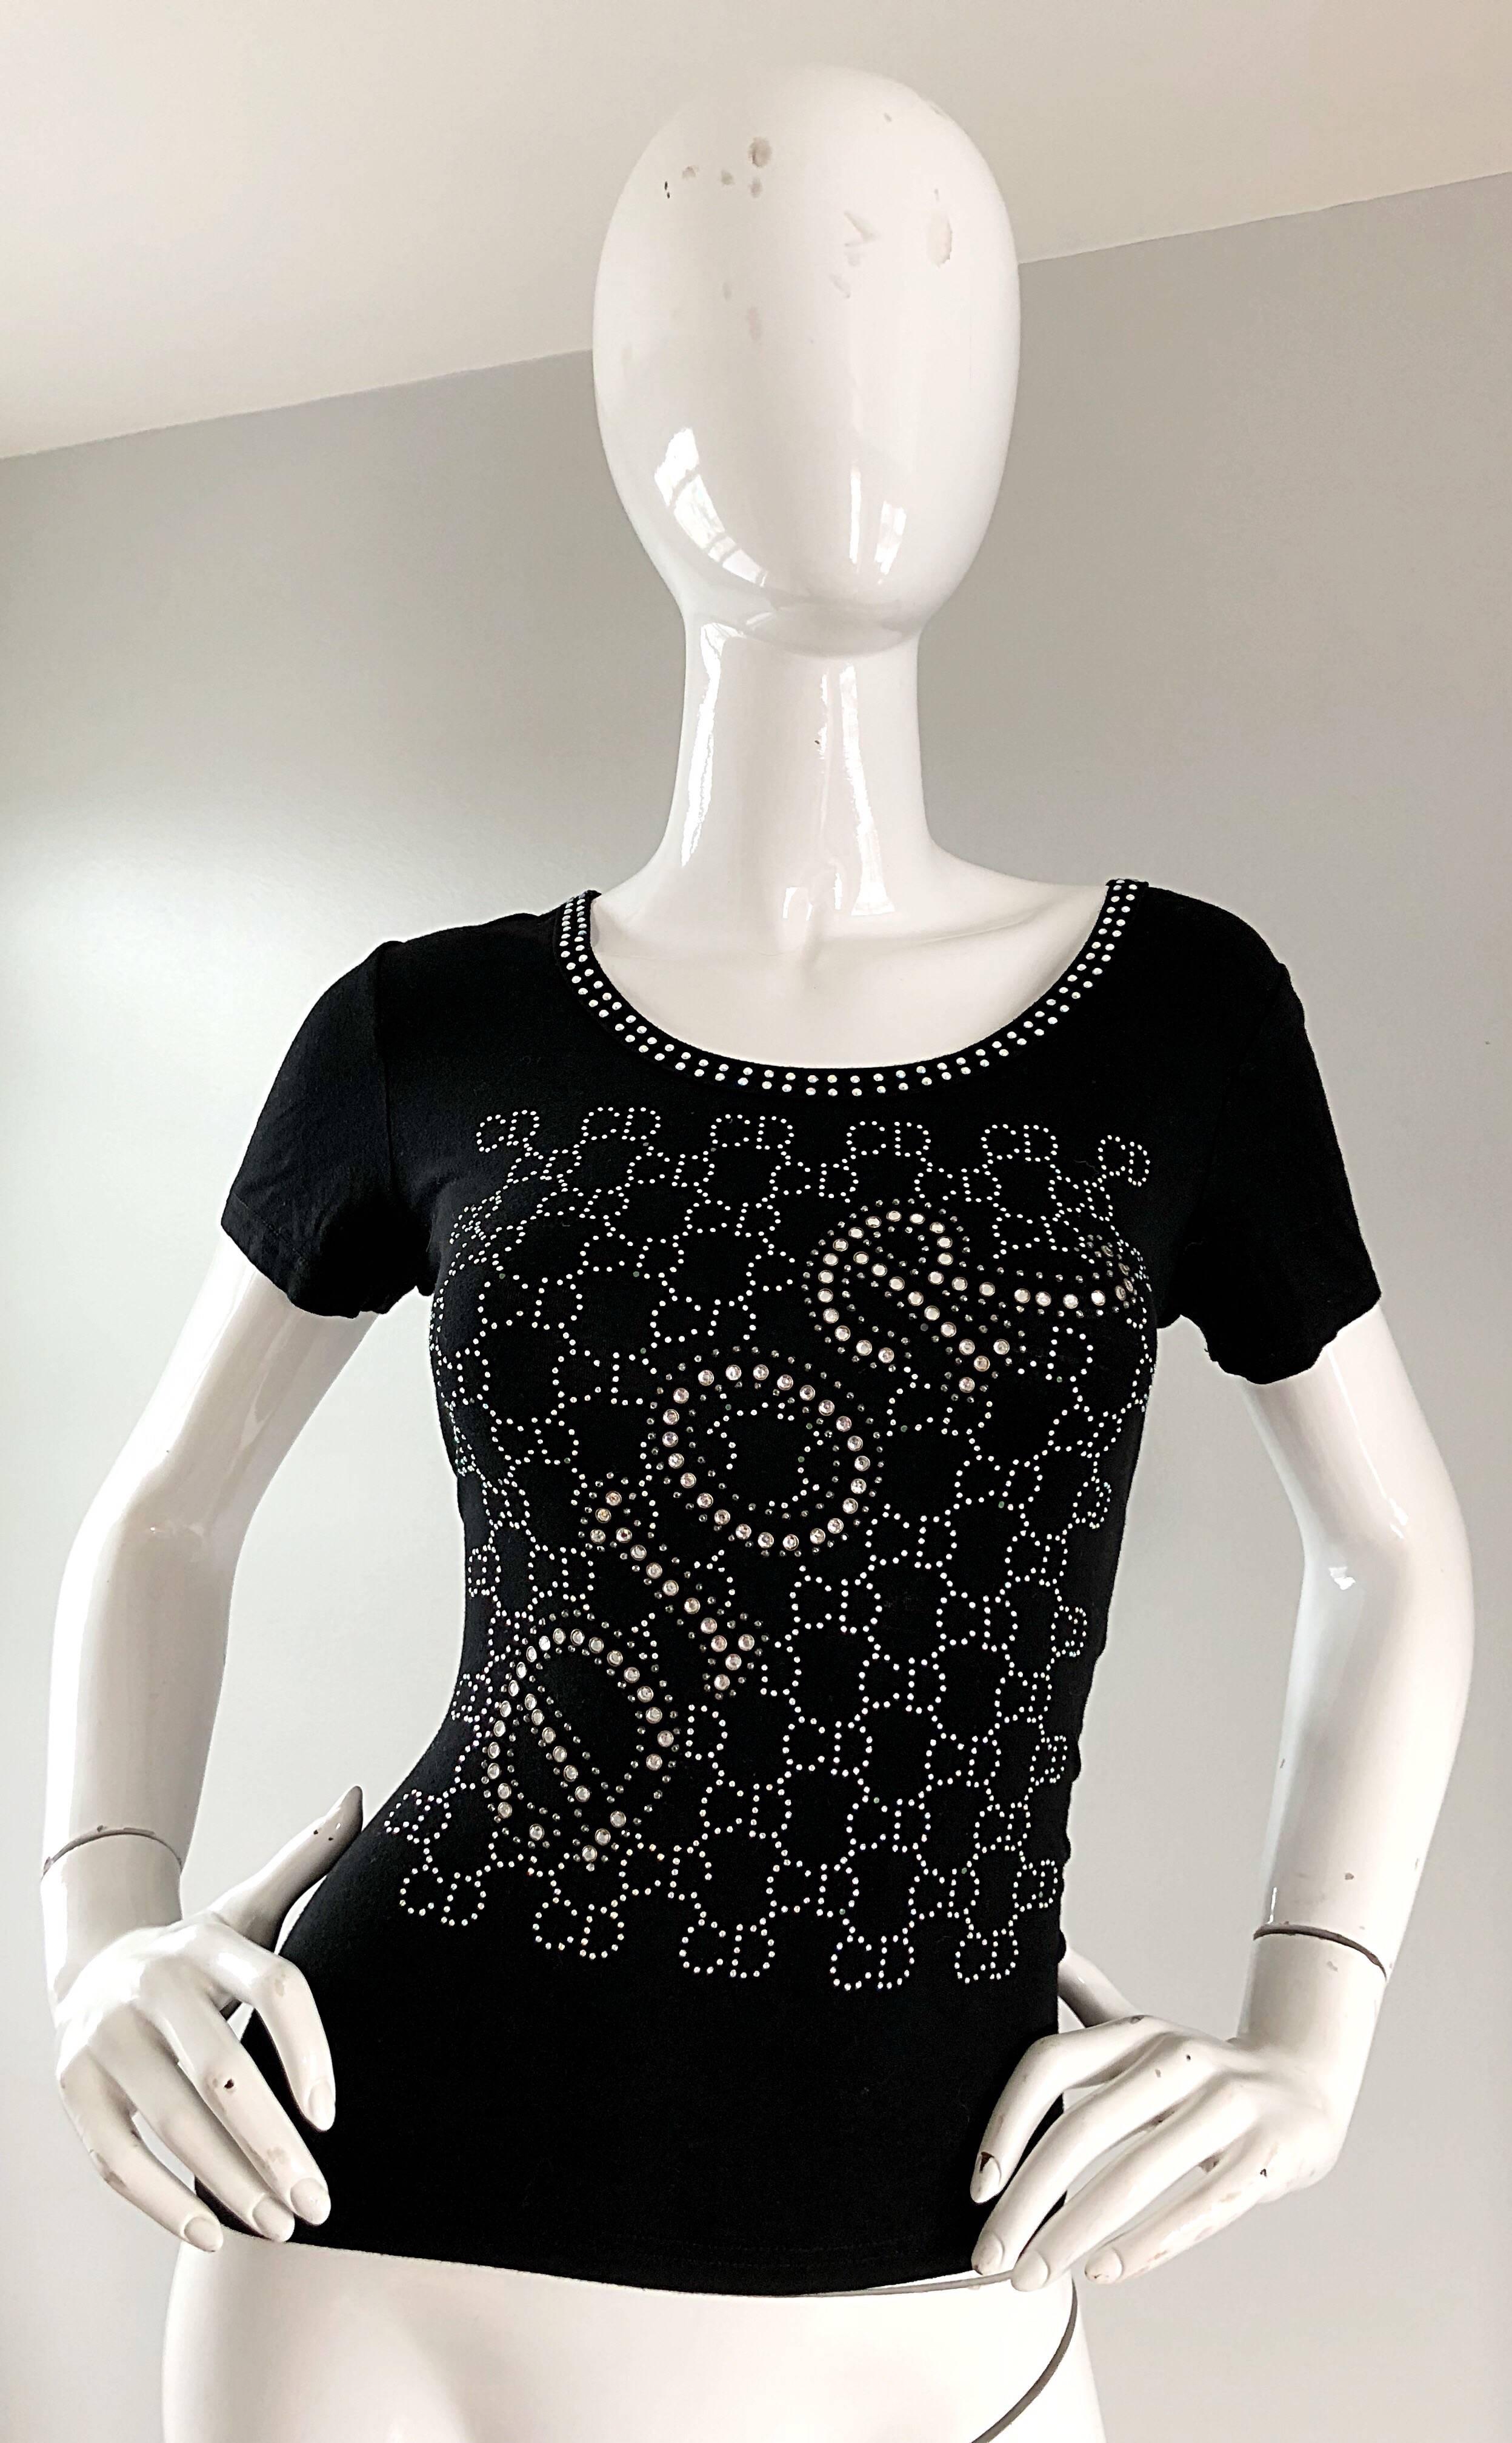 Fashionable vintage late 1990s CHRISTIAN DIOR by JOHN GALLIANO black rhinestone short sleeve logo top! Features hundreds of hand embossed silver rhinestones with the CD monogram throughout.  Soft stretch rayon. Diagonal DIOR spelt out in rhinestones